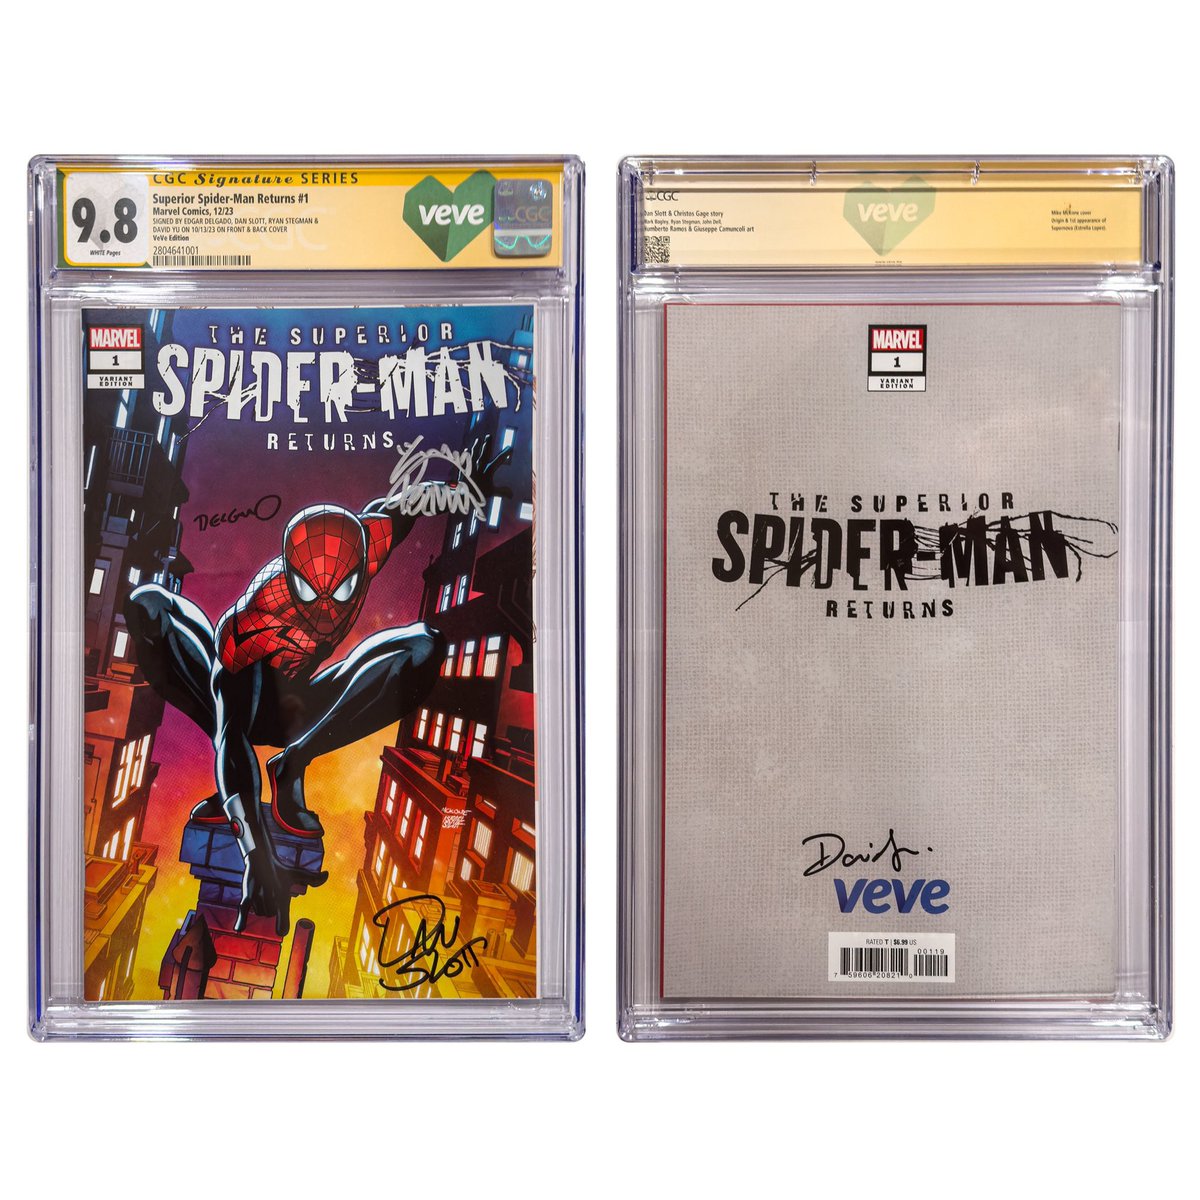 🚨FIRST VEVE CGC COMIC GIVEAWAY 🚨 We are giving away a CGC 9.8 yellow label of Superior Spider-Man Returns #1 with the FIRST EVER VeVe CGC comic label! The comic is CGC graded 9.8 with witness signatures by Edgar Delgado, Dan Slott, Ryan Stegman, and VeVe CEO, @DavidYuNZ!…